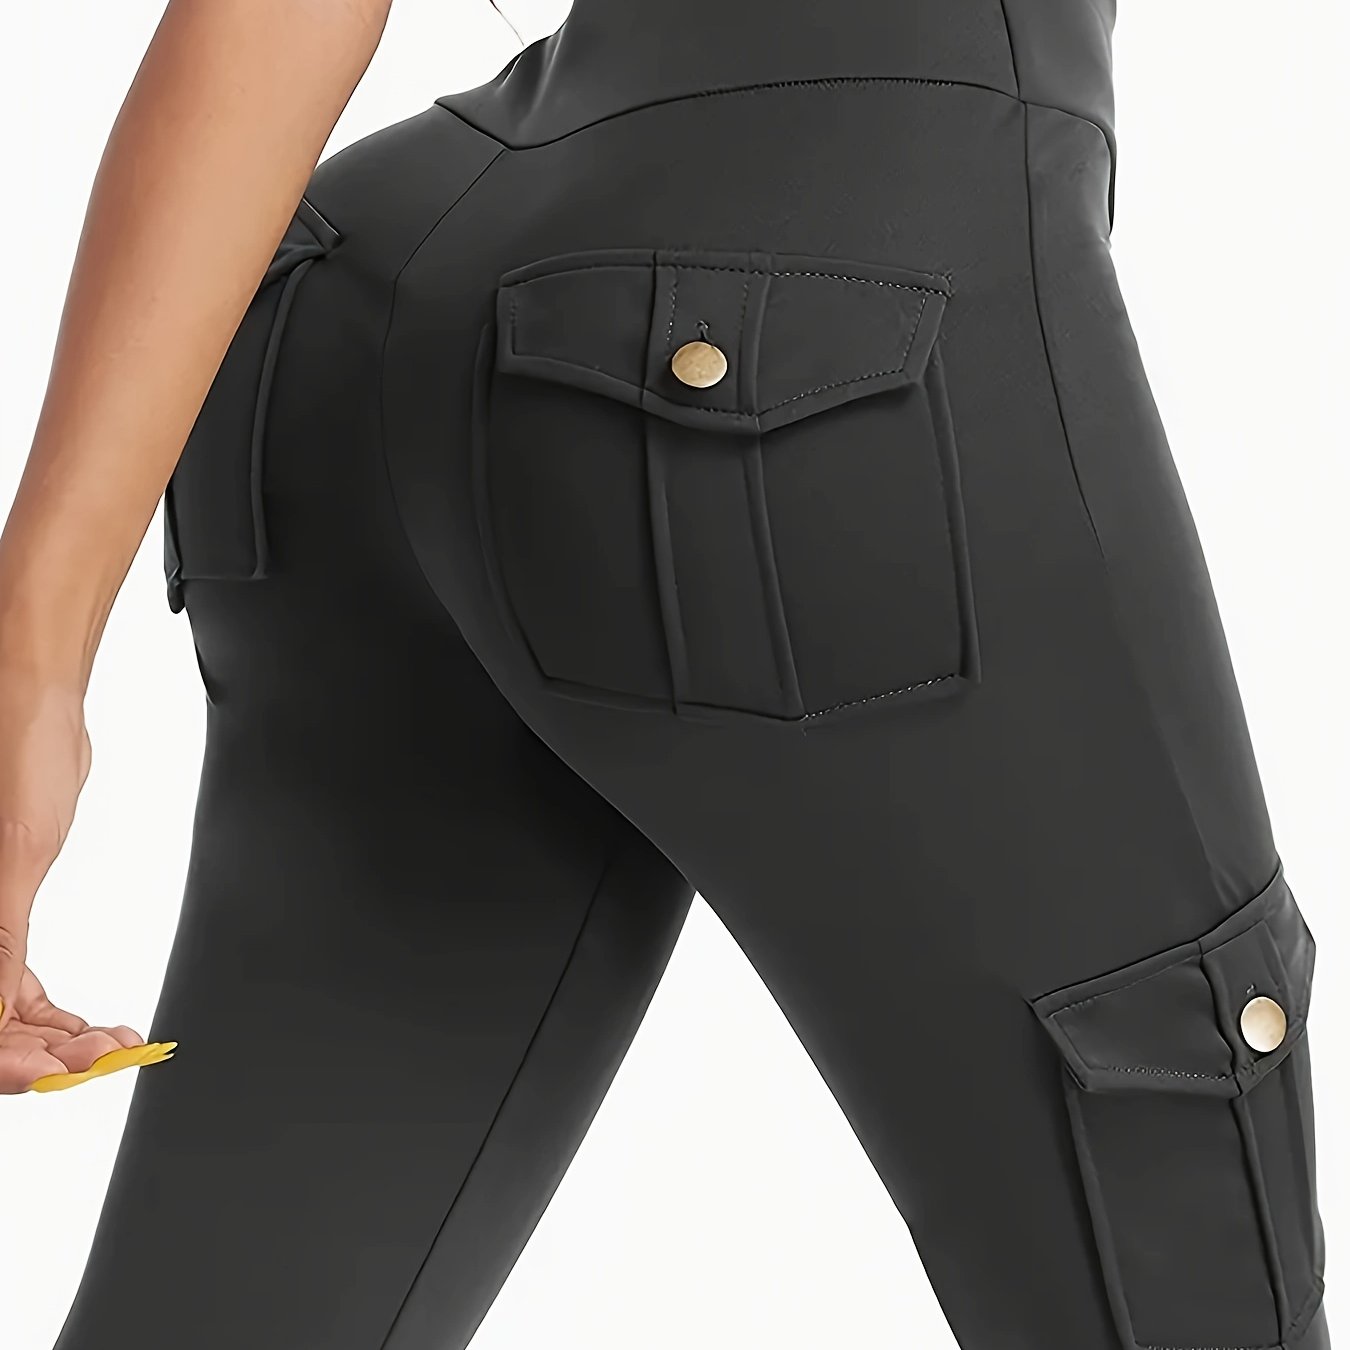 Versatile & Chic Outdoor Activewear Pants for Women - Stretchy, Durable, with Multi-Pockets for Spring to Fall Adventures